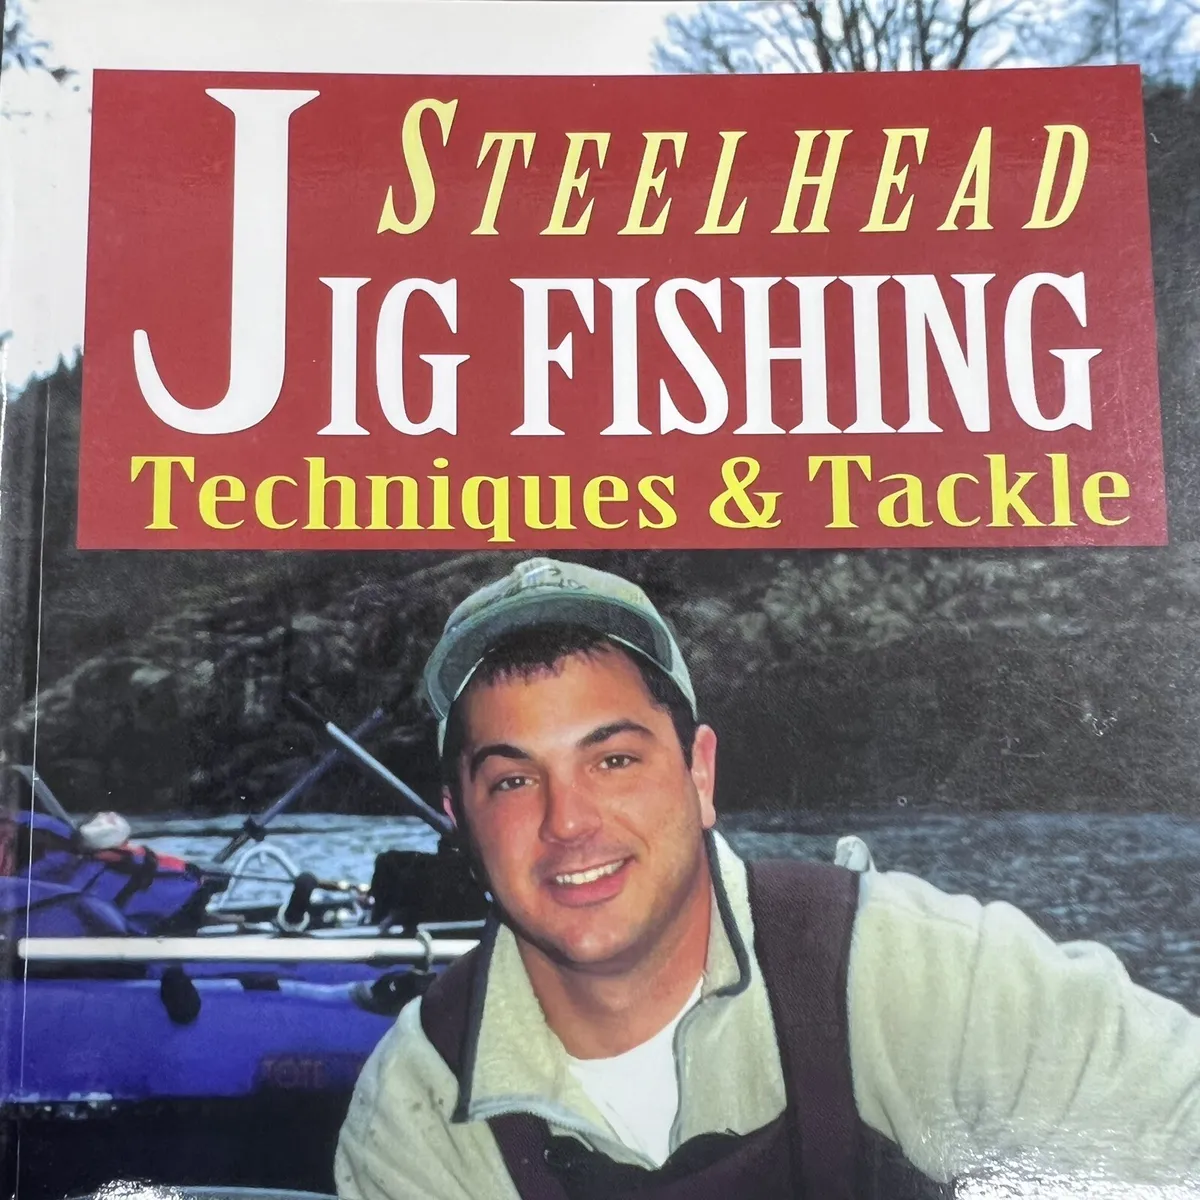 Steelhead Jig Fishing Techniques & Tackle by Vedder & Harthorn Amato  Publication 9781571880734